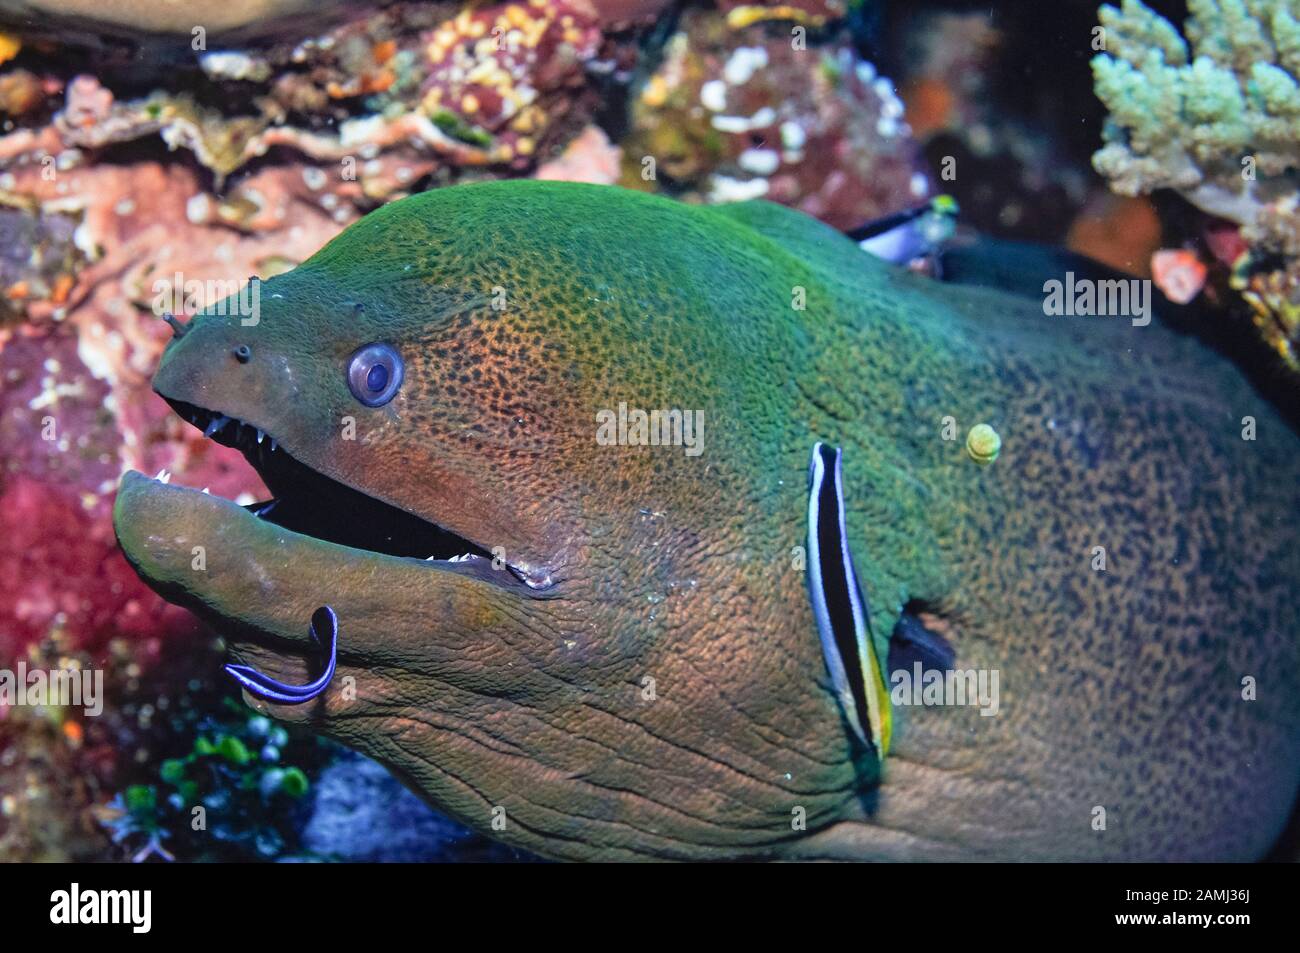 Giant Moray Eel, Gymnothorax javanicus, being cleaned by a Bluestreak Cleaner Wrasse,Labroides dimidiatus, Komodo National Park, Indonesia, Flores Sea Stock Photo